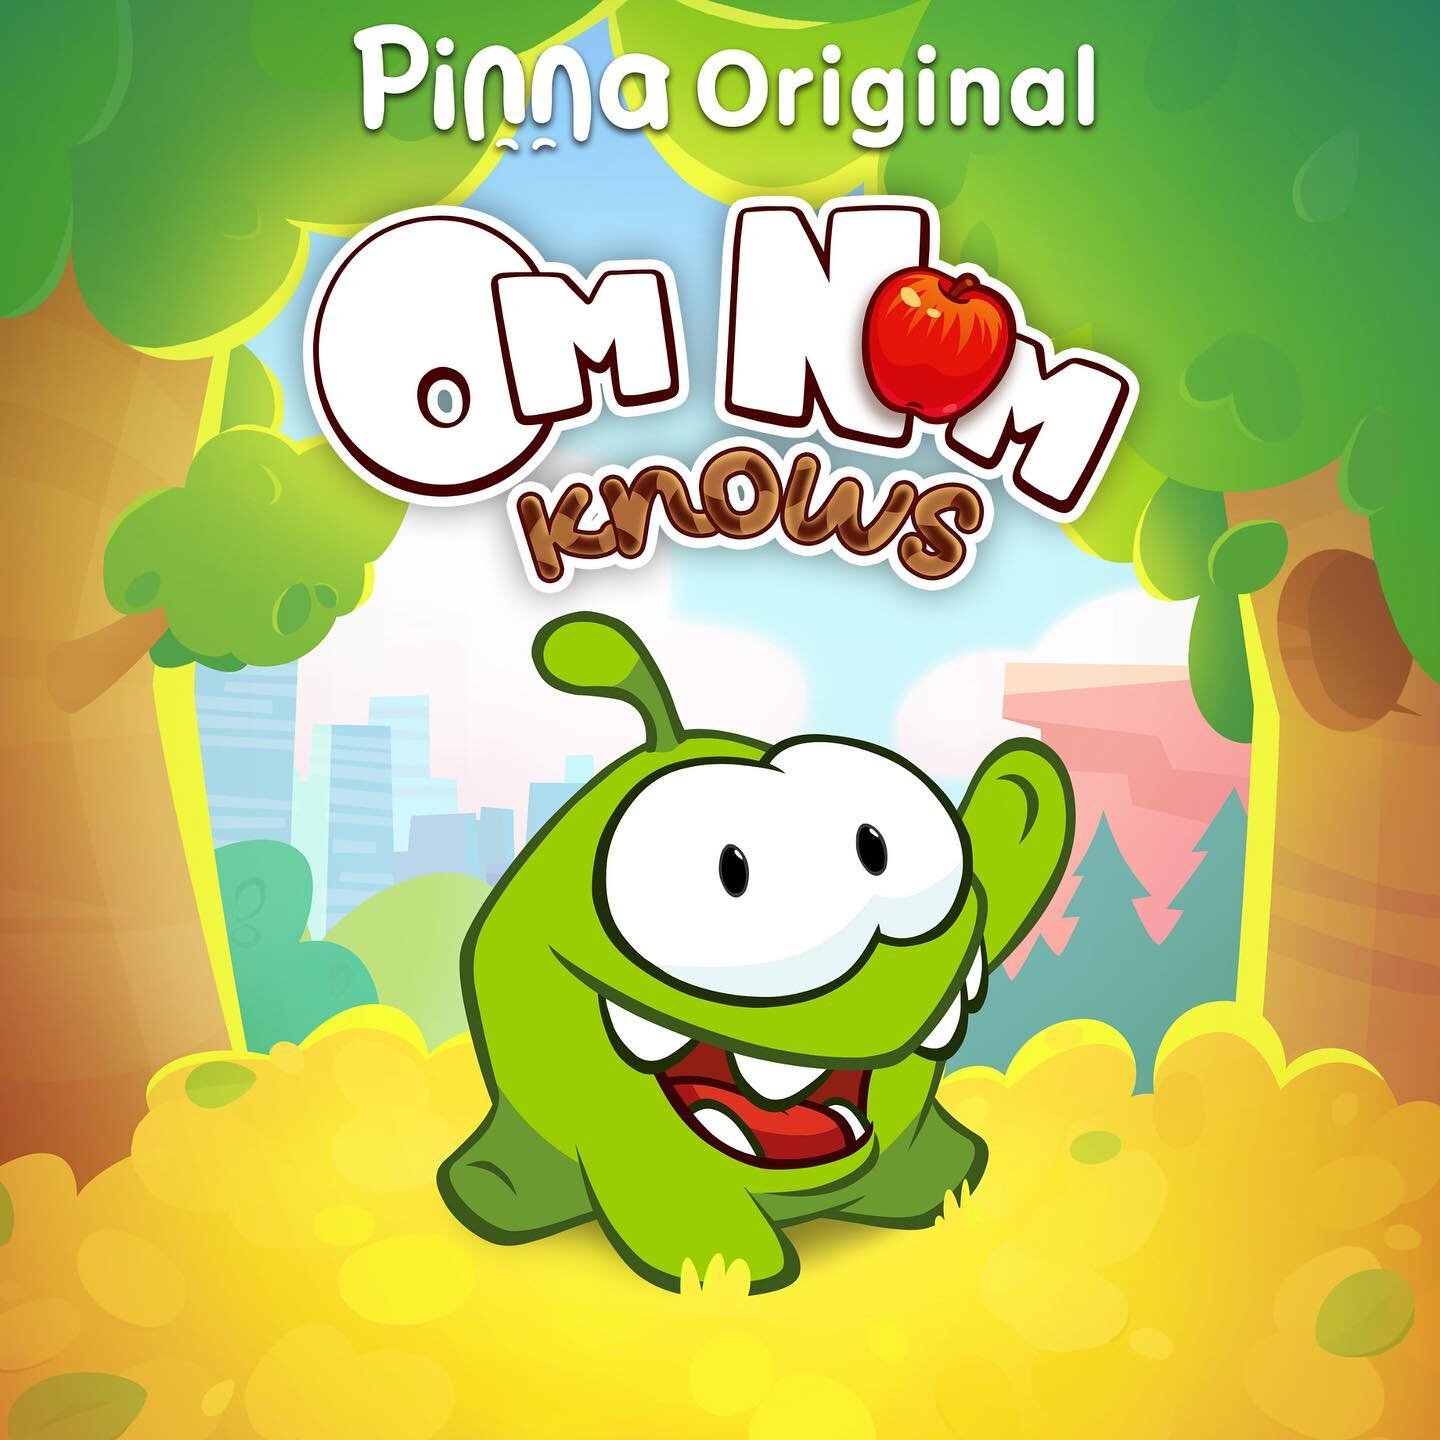 🚨New Show 🚨Om Nom Knows drops today in the Pinna Surprise Box 🎁 Only on @pinnaaudio 🎧 You have 24 hours to solve the first riddle. Go! 

#pinnaaudio #OmNom #OmNomKnows #audioforkids #podcastsforkids #kidspodcast #kidsaudio #riddles